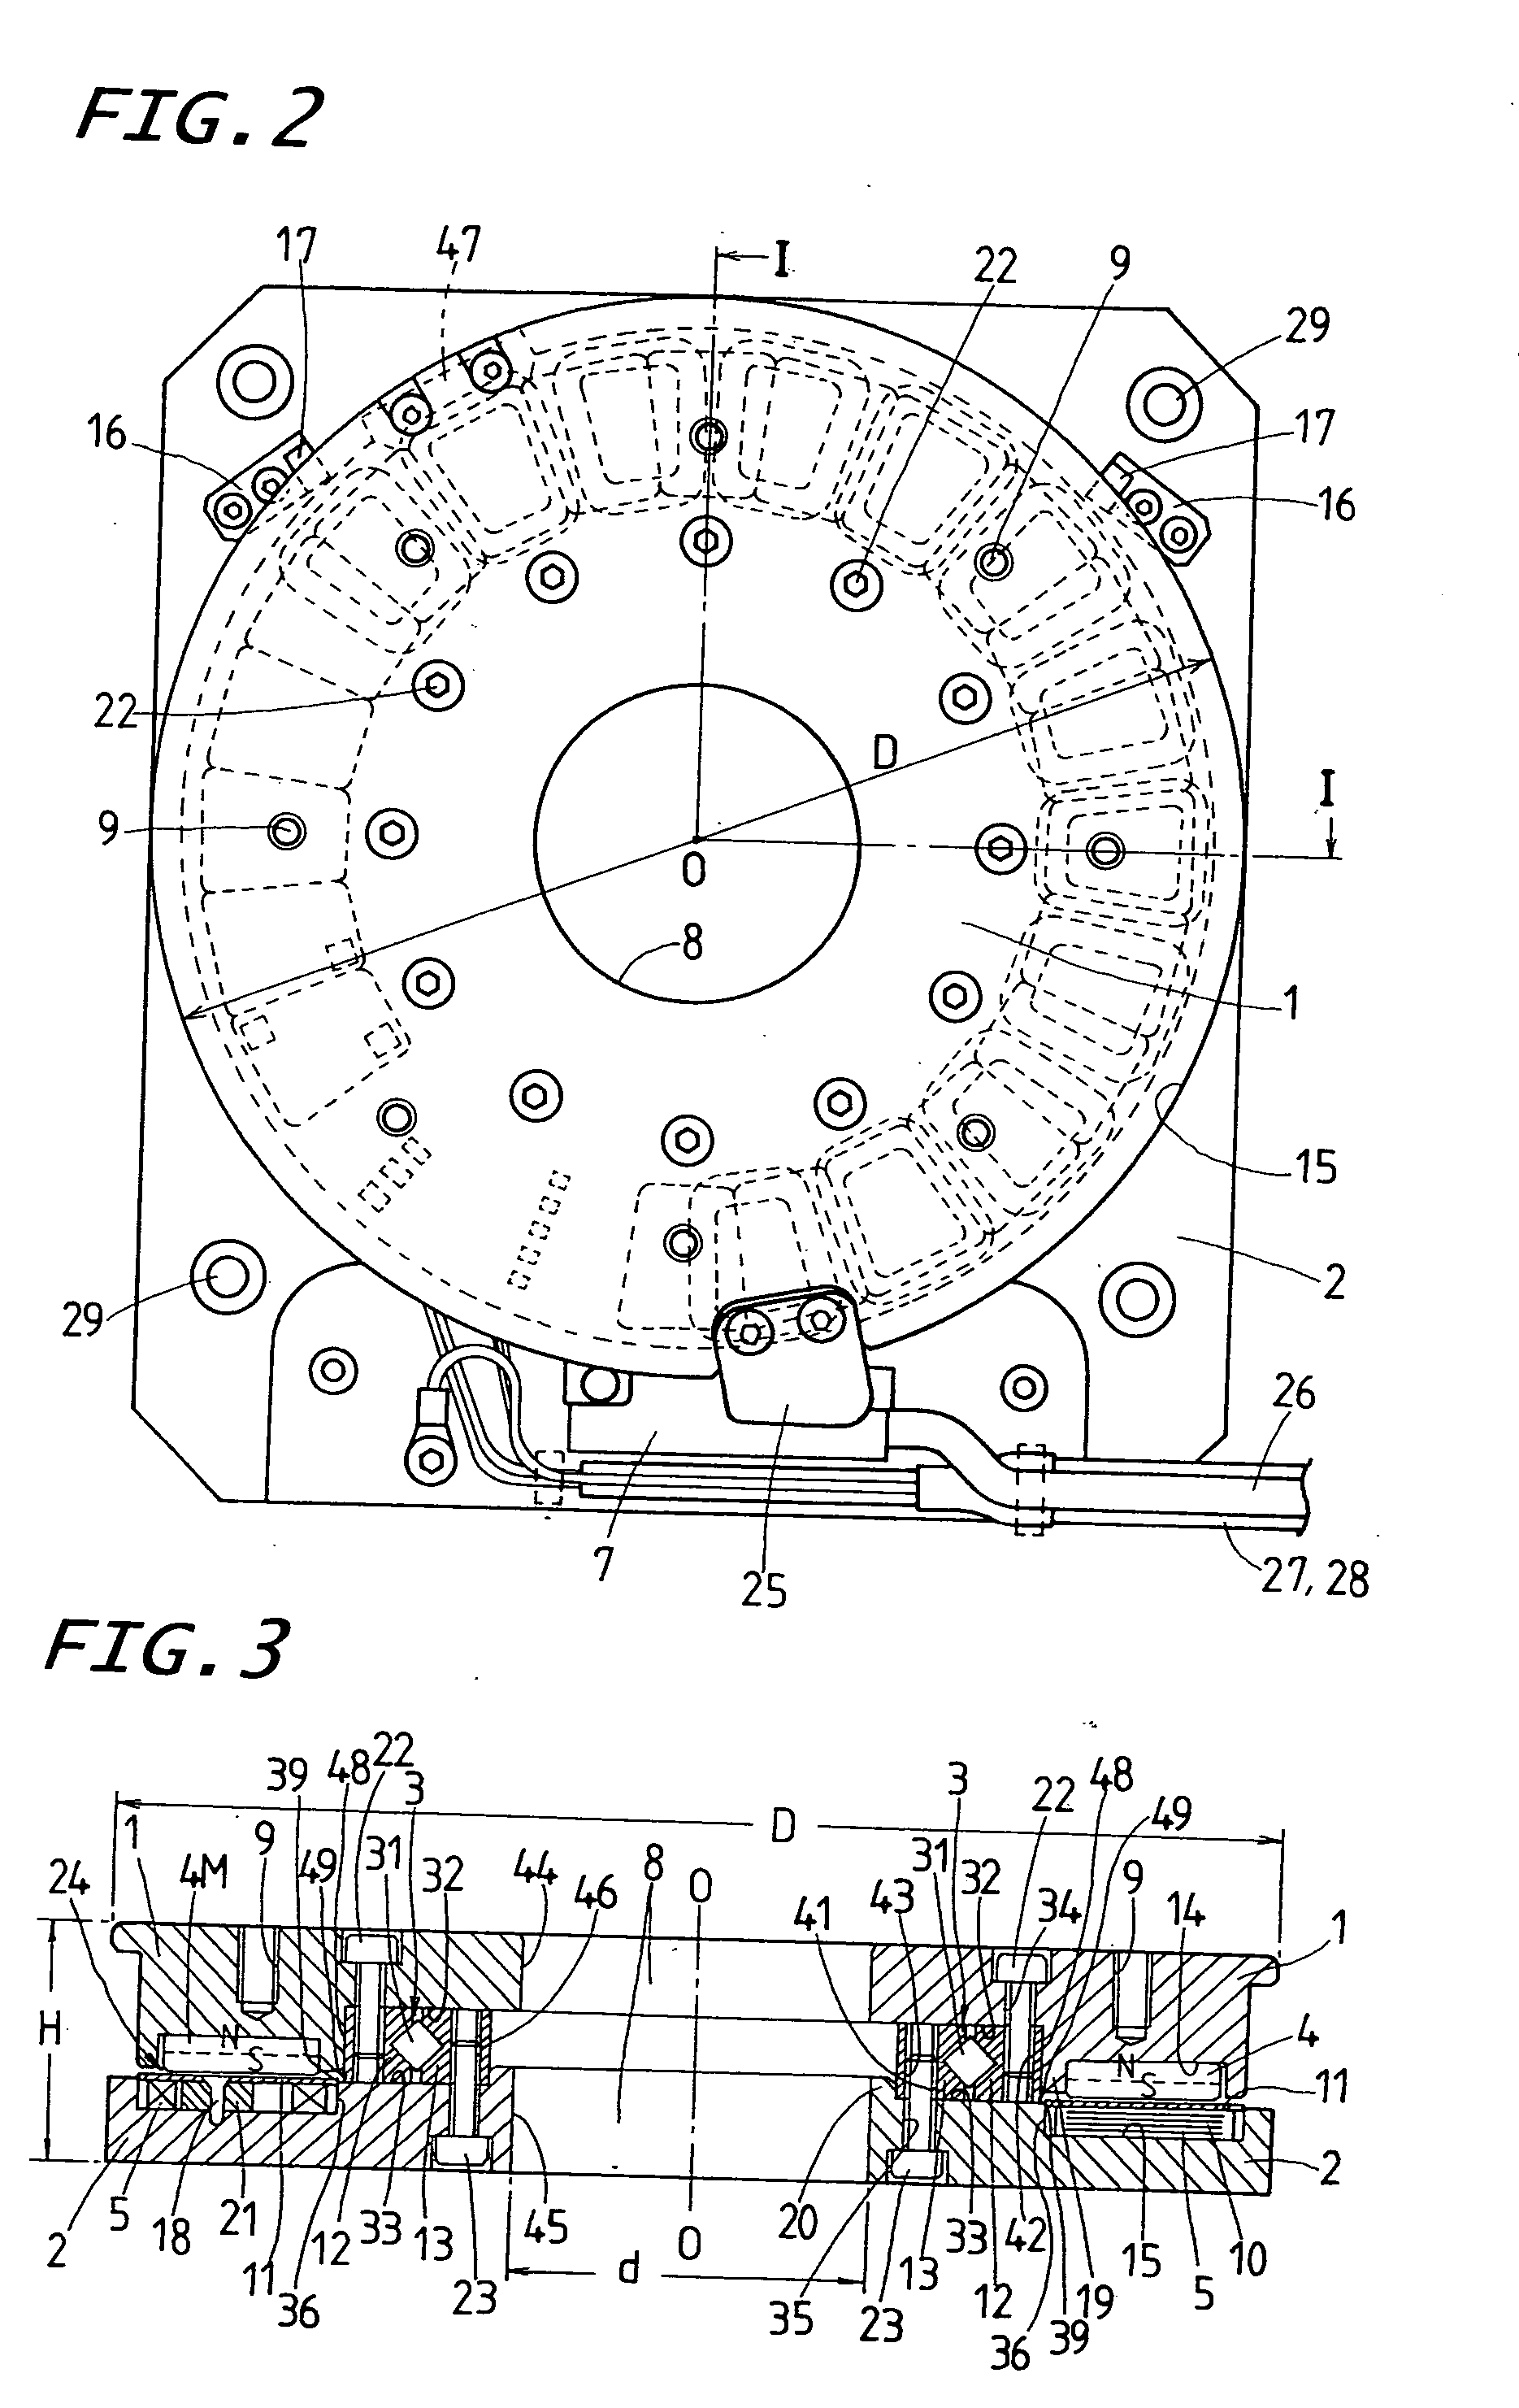 Position-control stage system